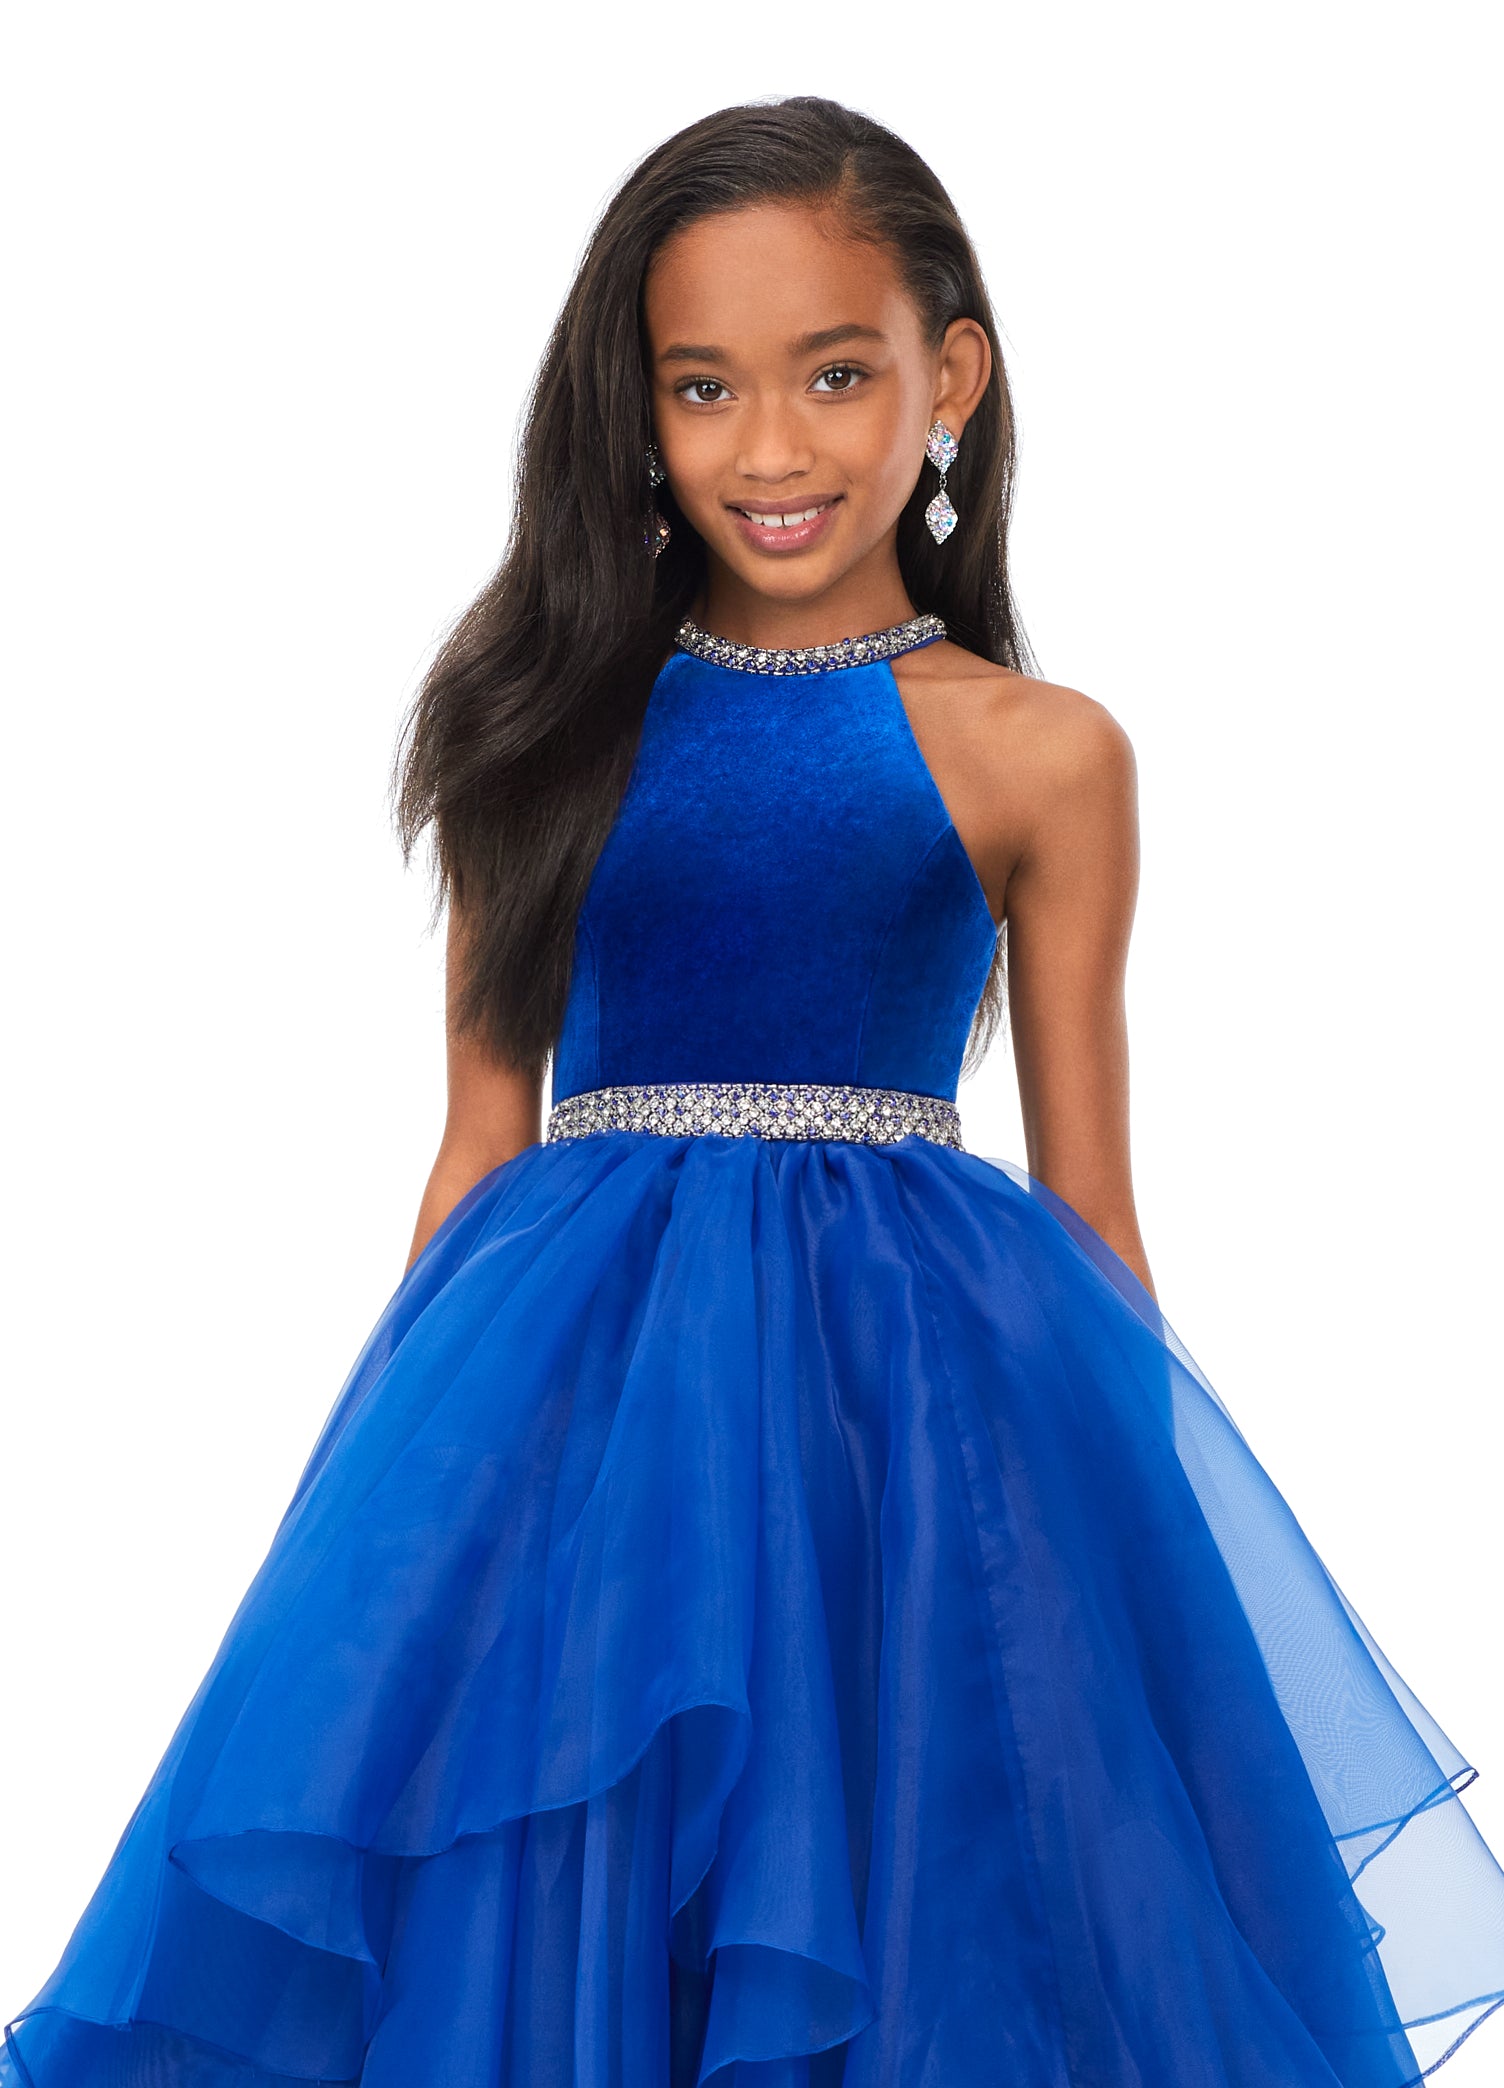 2021 Girls Pageant Gowns Sale | PA1516 | Wedding & Flower Girl Matching  Dresses.